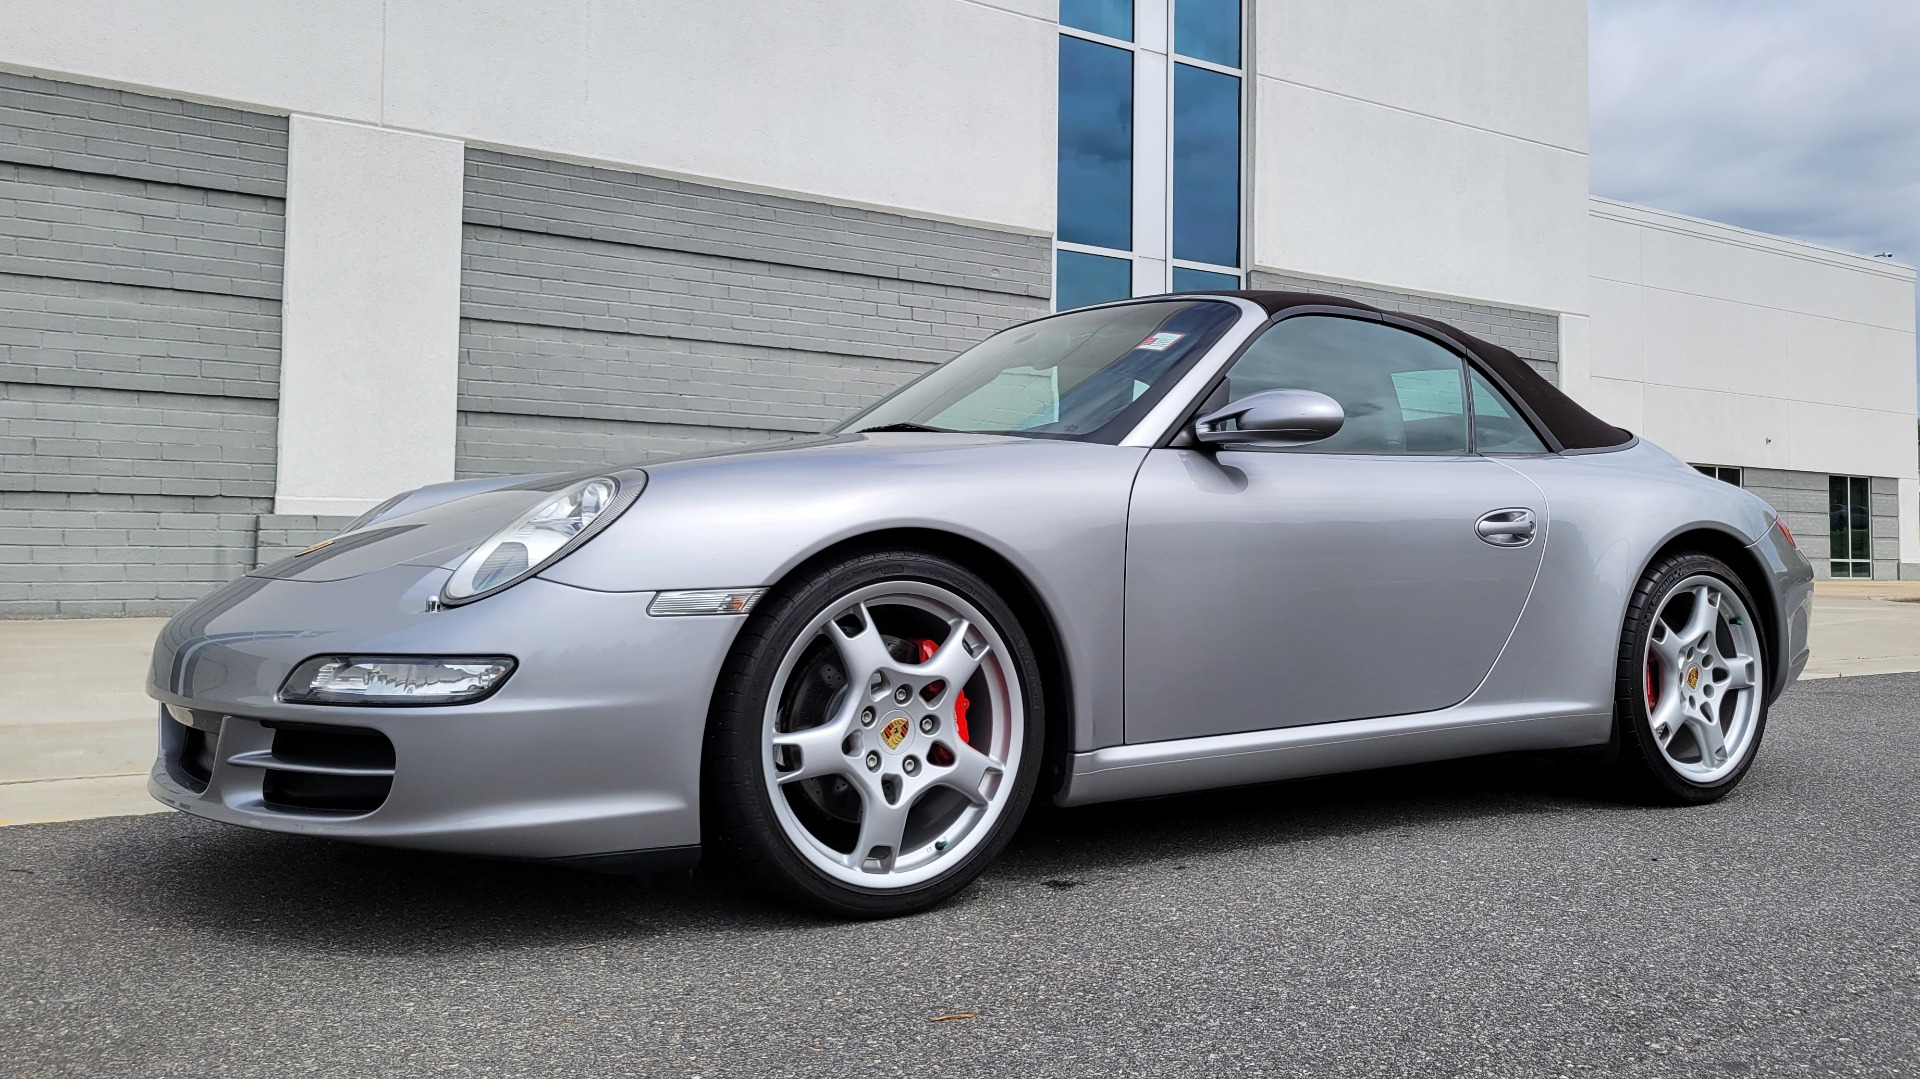 Used 2006 Porsche 911 CARRERA S CABRIOLET / SPORT CHRONO / BOSE / SPORT SEATS / SPORT SHIFTER for sale $62,999 at Formula Imports in Charlotte NC 28227 8